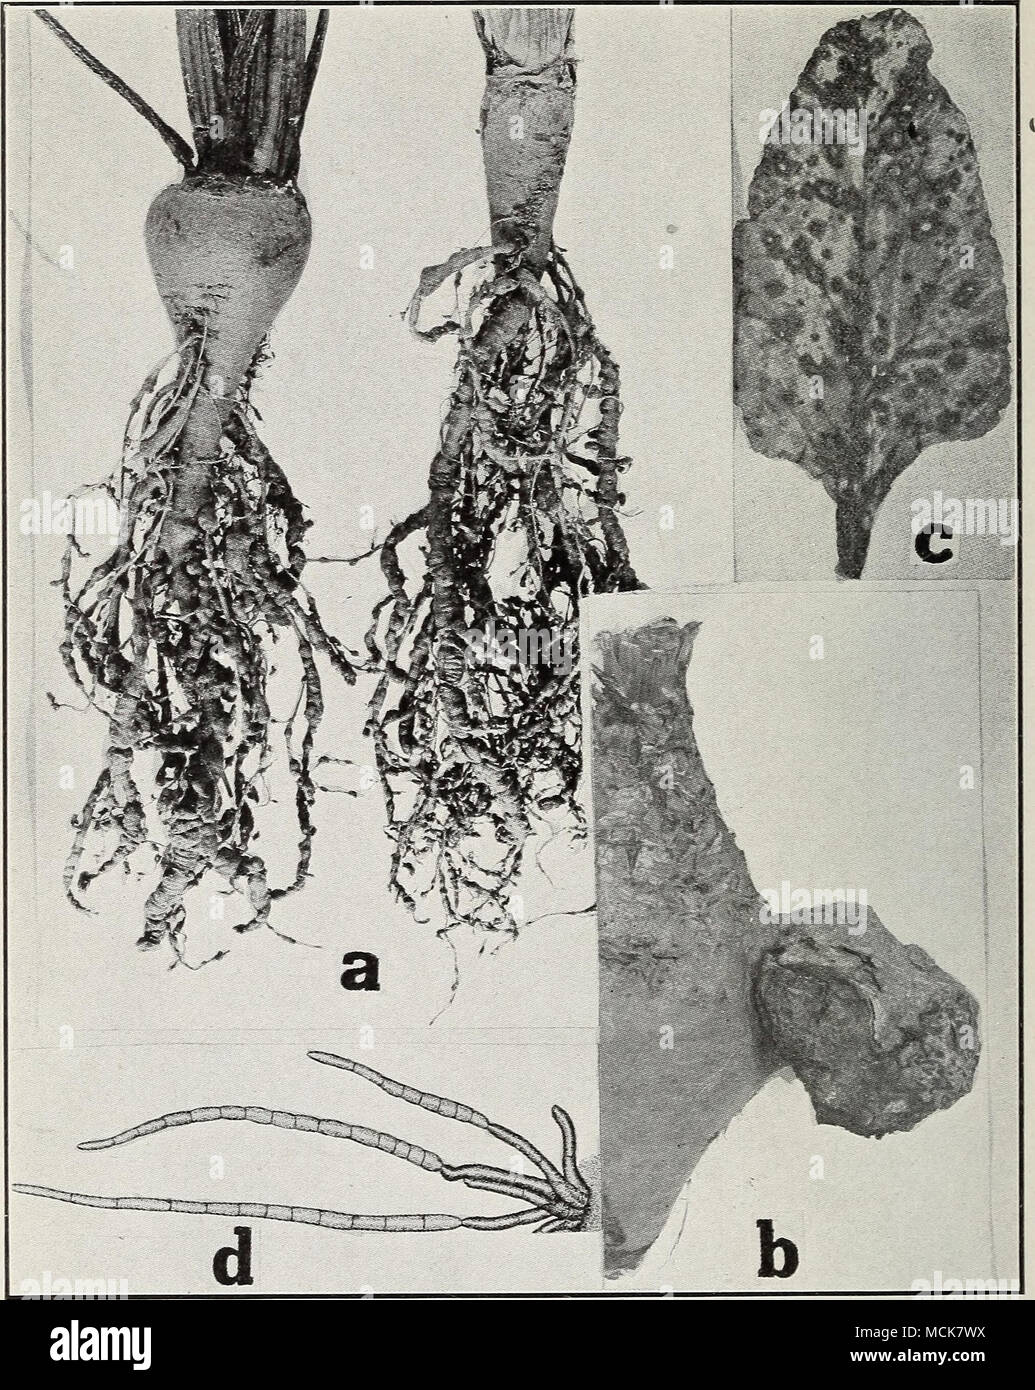 . Fig. i6. Beet Diseases. a. Nematode or root knot, h. Crown gall, c. Cercospora leaf spot (after Halsted), d. spores of Cercospora beticola (after Schwarze). Stock Photo